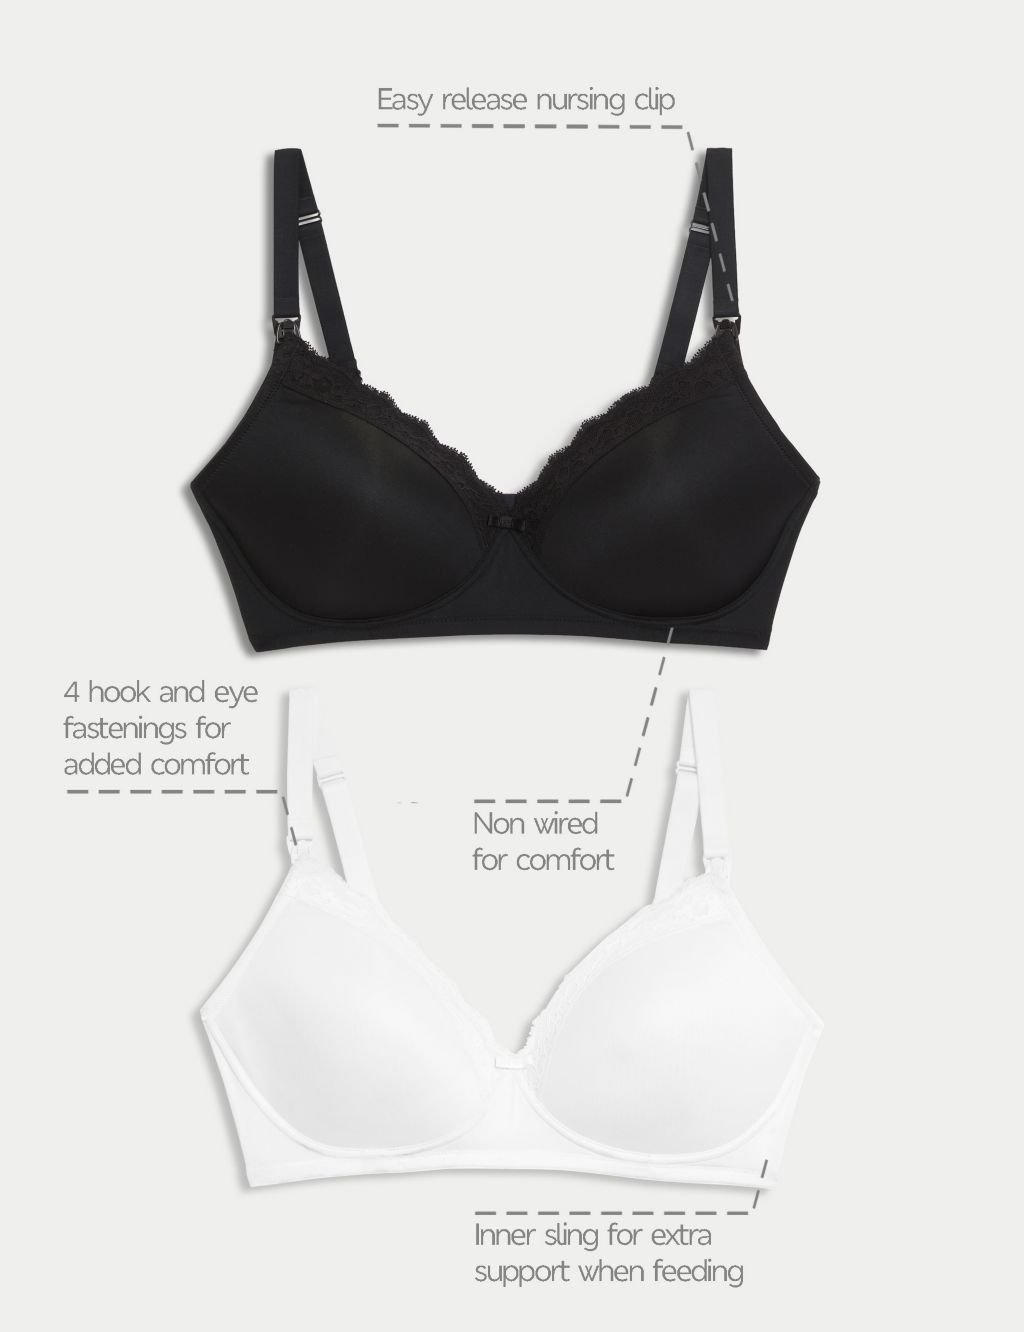 Ladies Marks And Spencer Pack Of 2 Full Cup Nursing Bras 34H BNWT